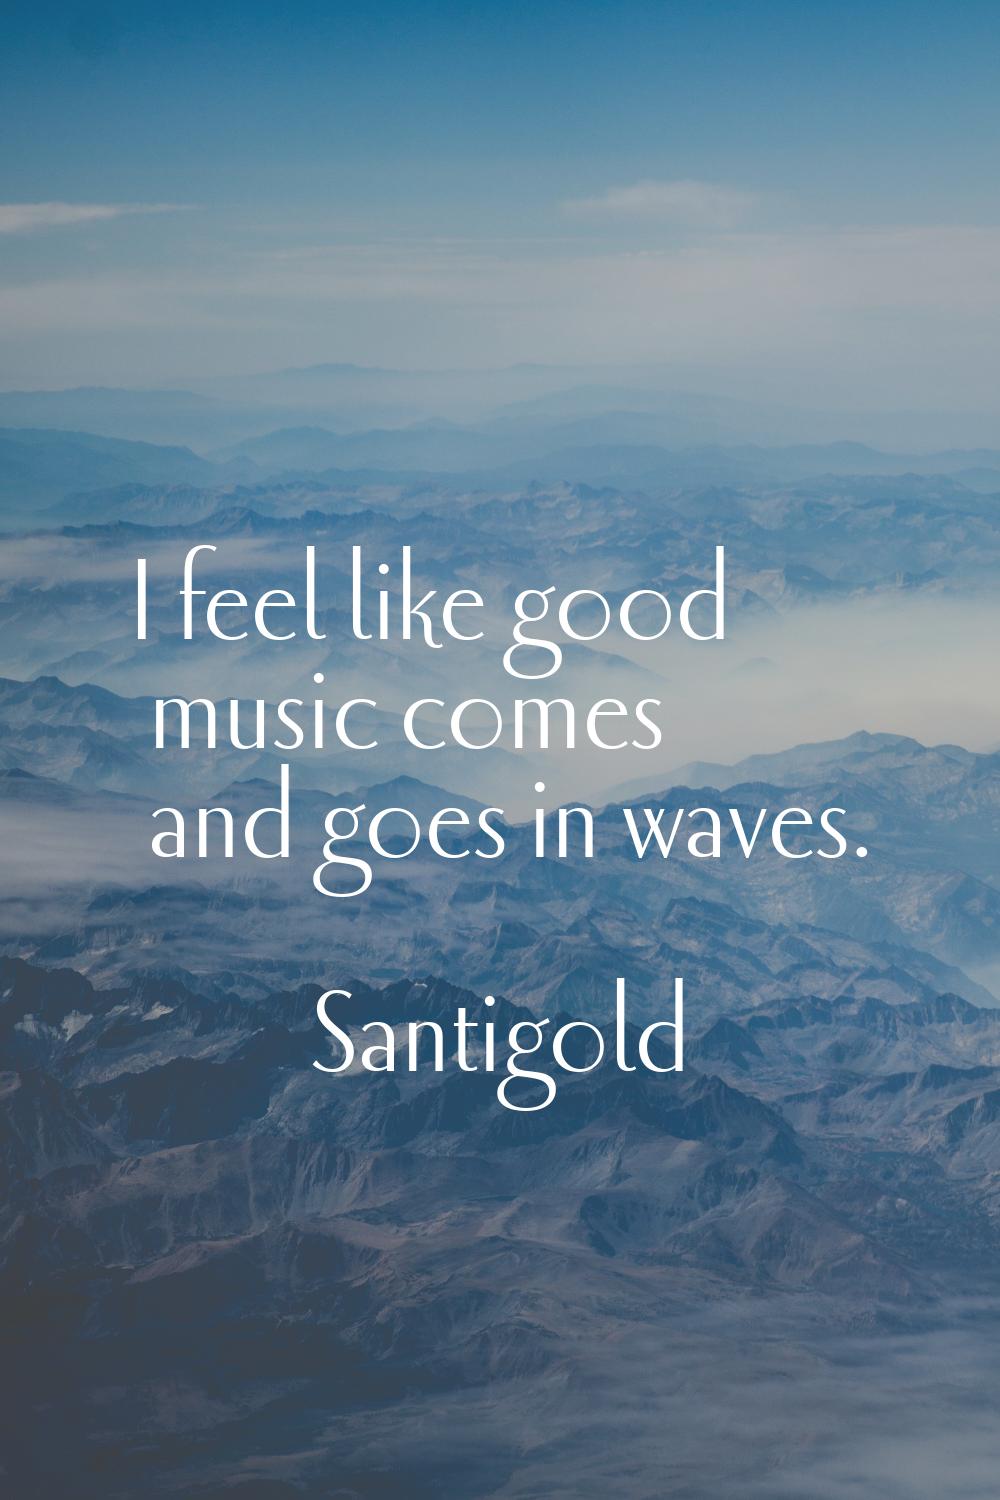 I feel like good music comes and goes in waves.